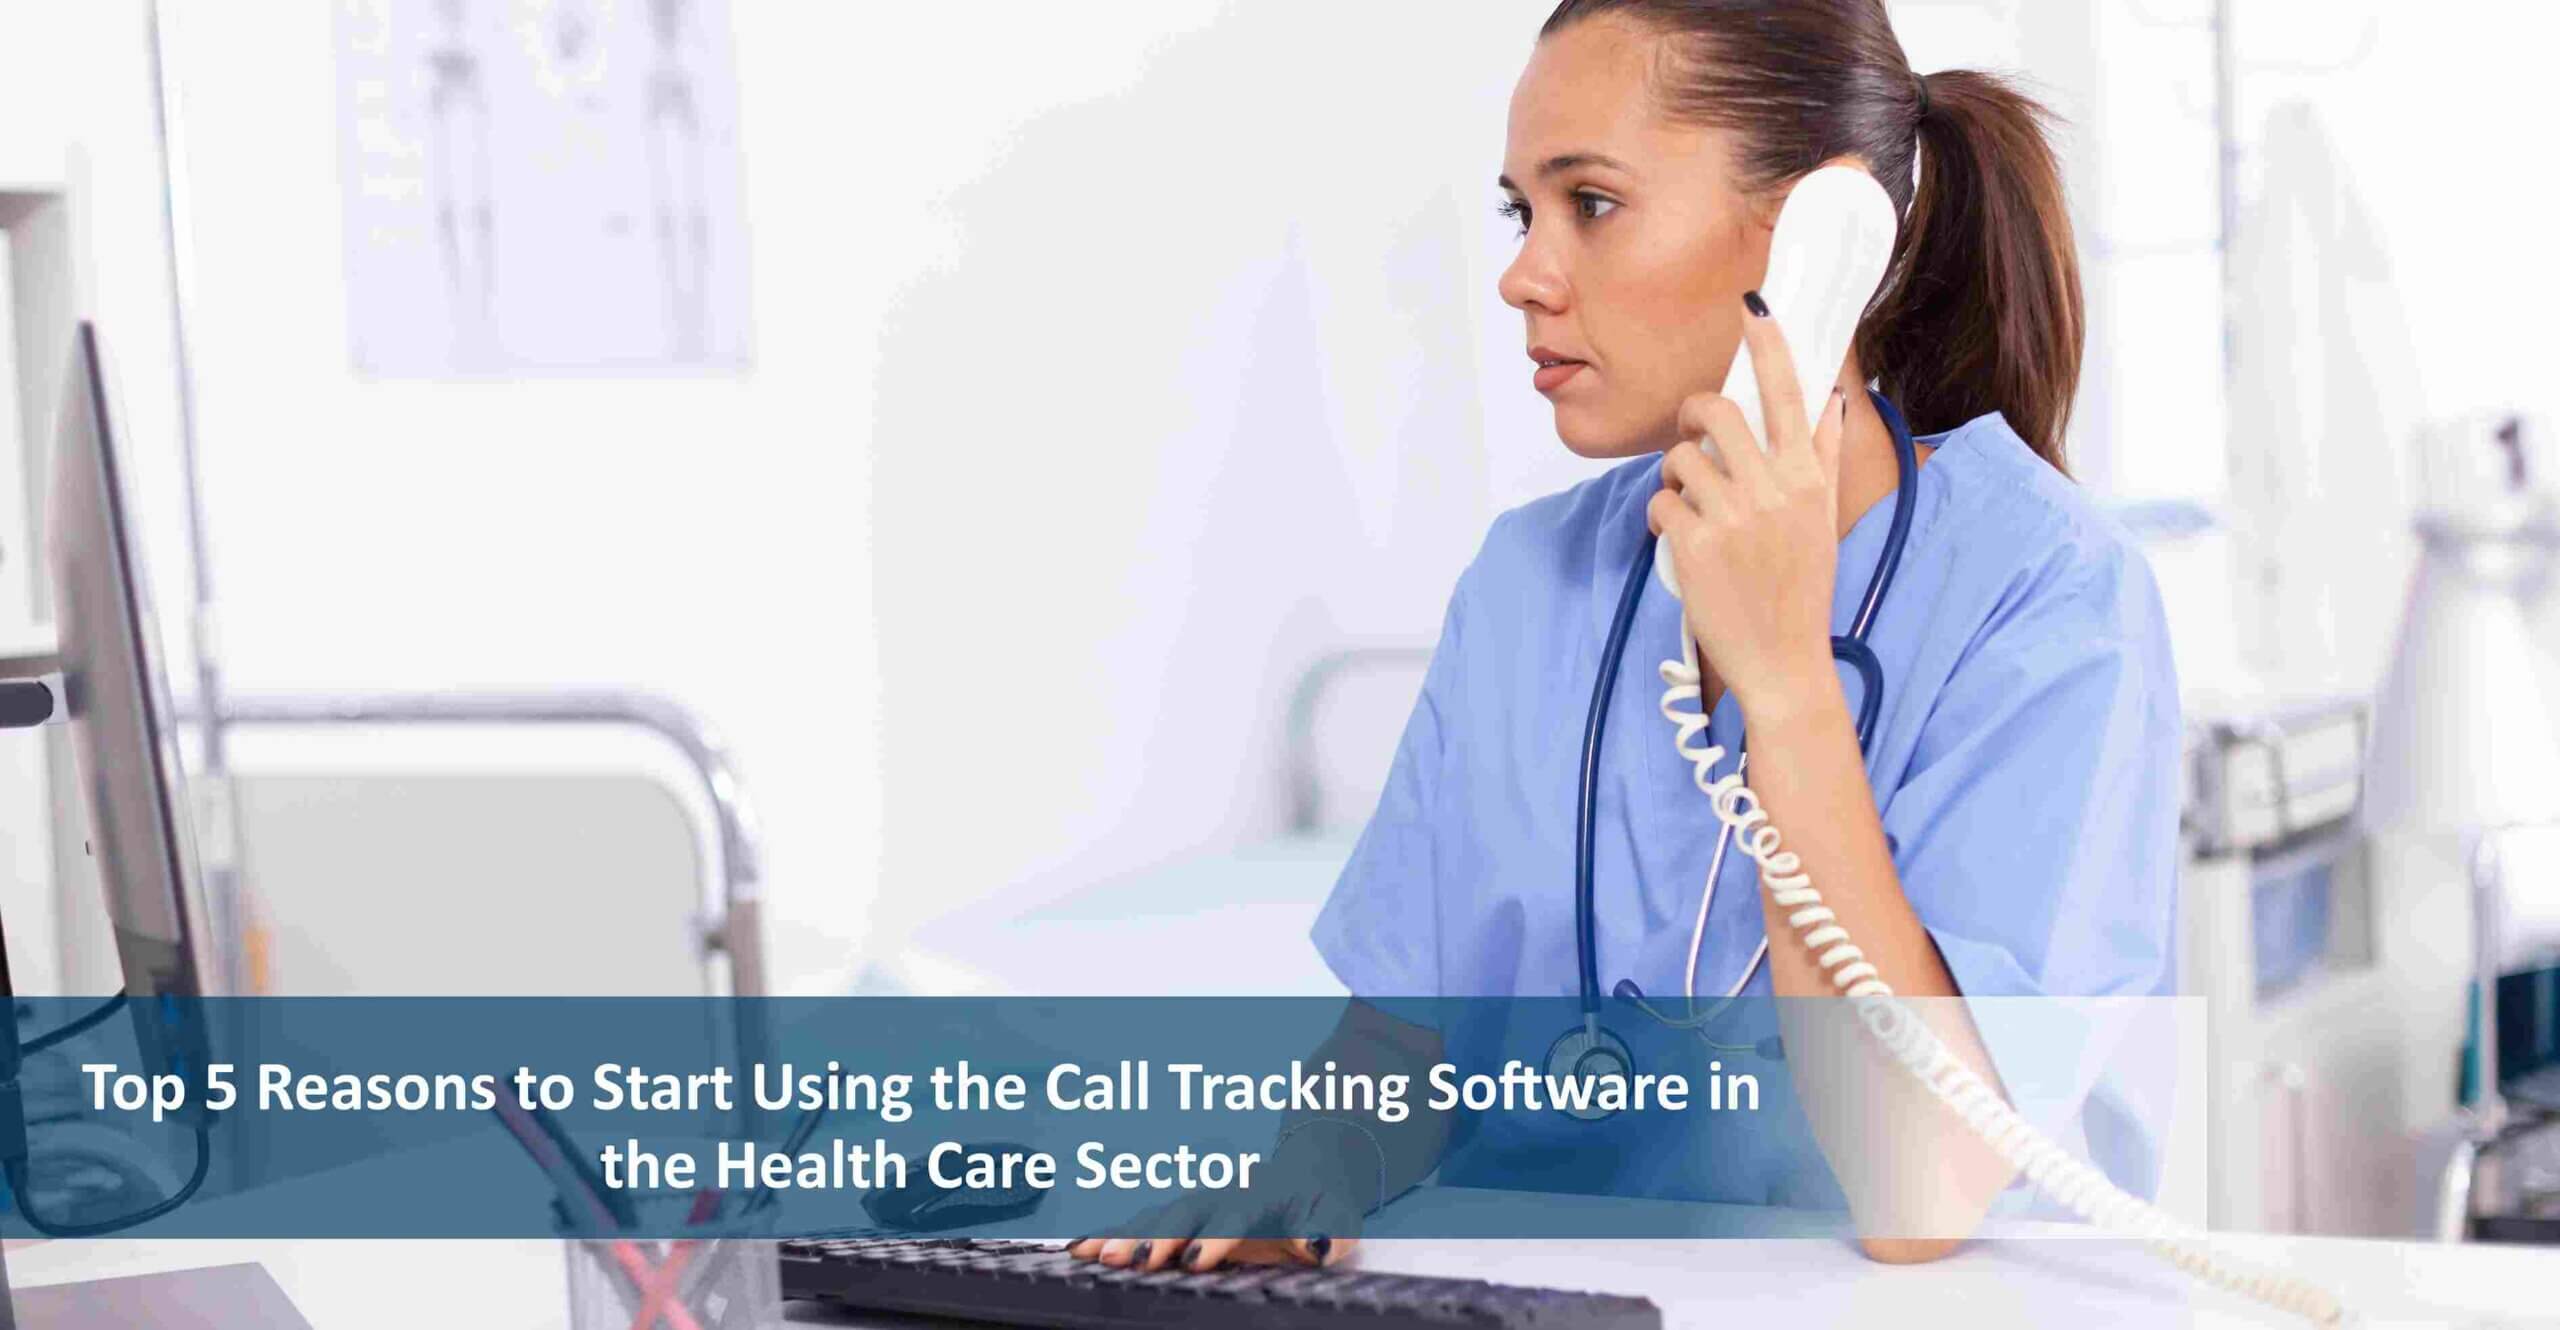 Reasons why Health Care Sector should use Call Tracking Software | MCUBE